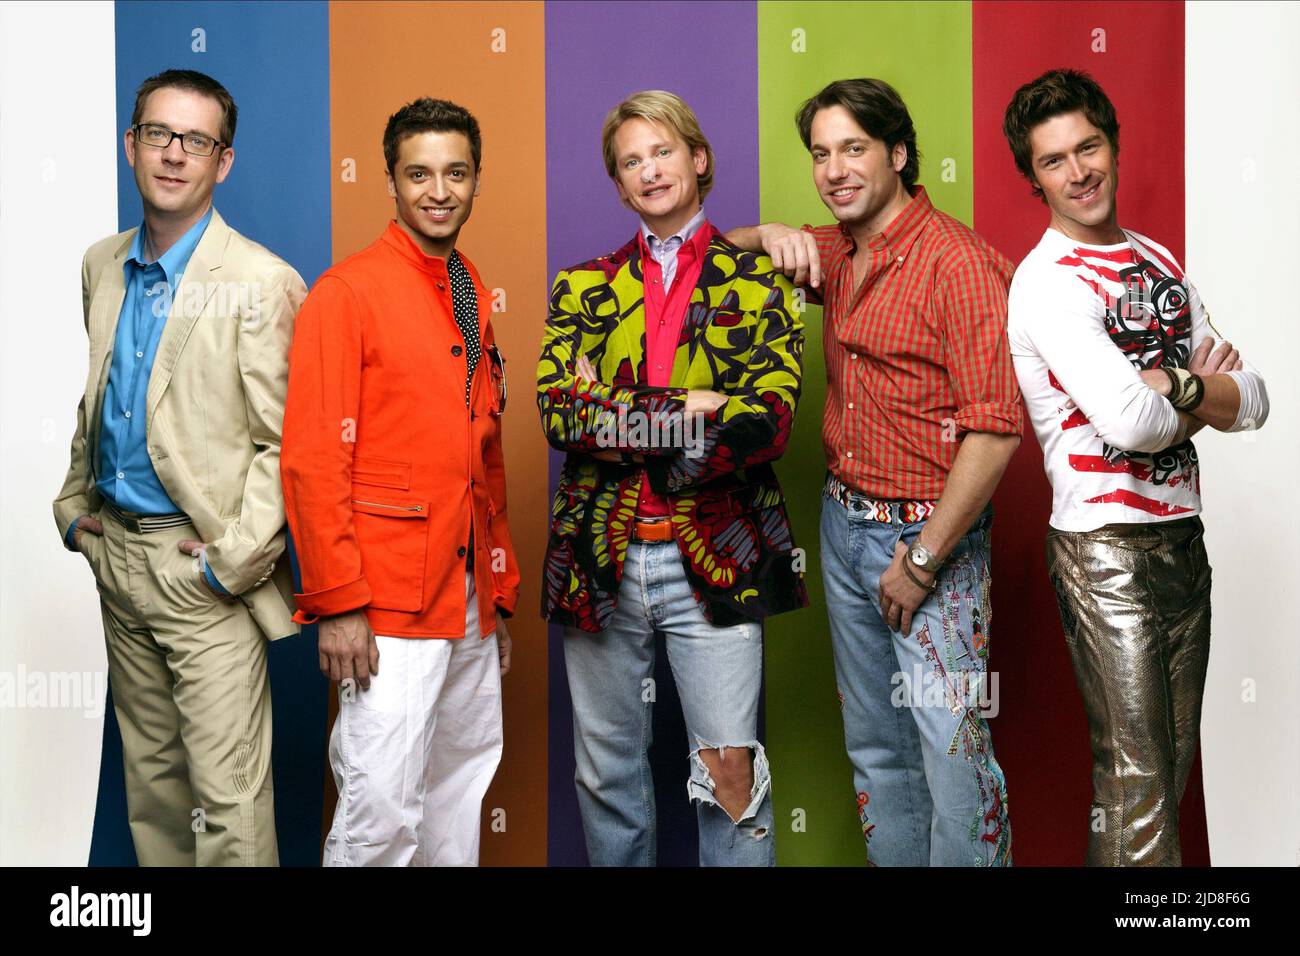 ALLEN,RODRIGUEZ,KRESSLEY,FILICIA,DOUGLAS, QUEER EYE FOR THE STRAIGHT GUY, 2003, ©CHANNEL 4 Stock Photo